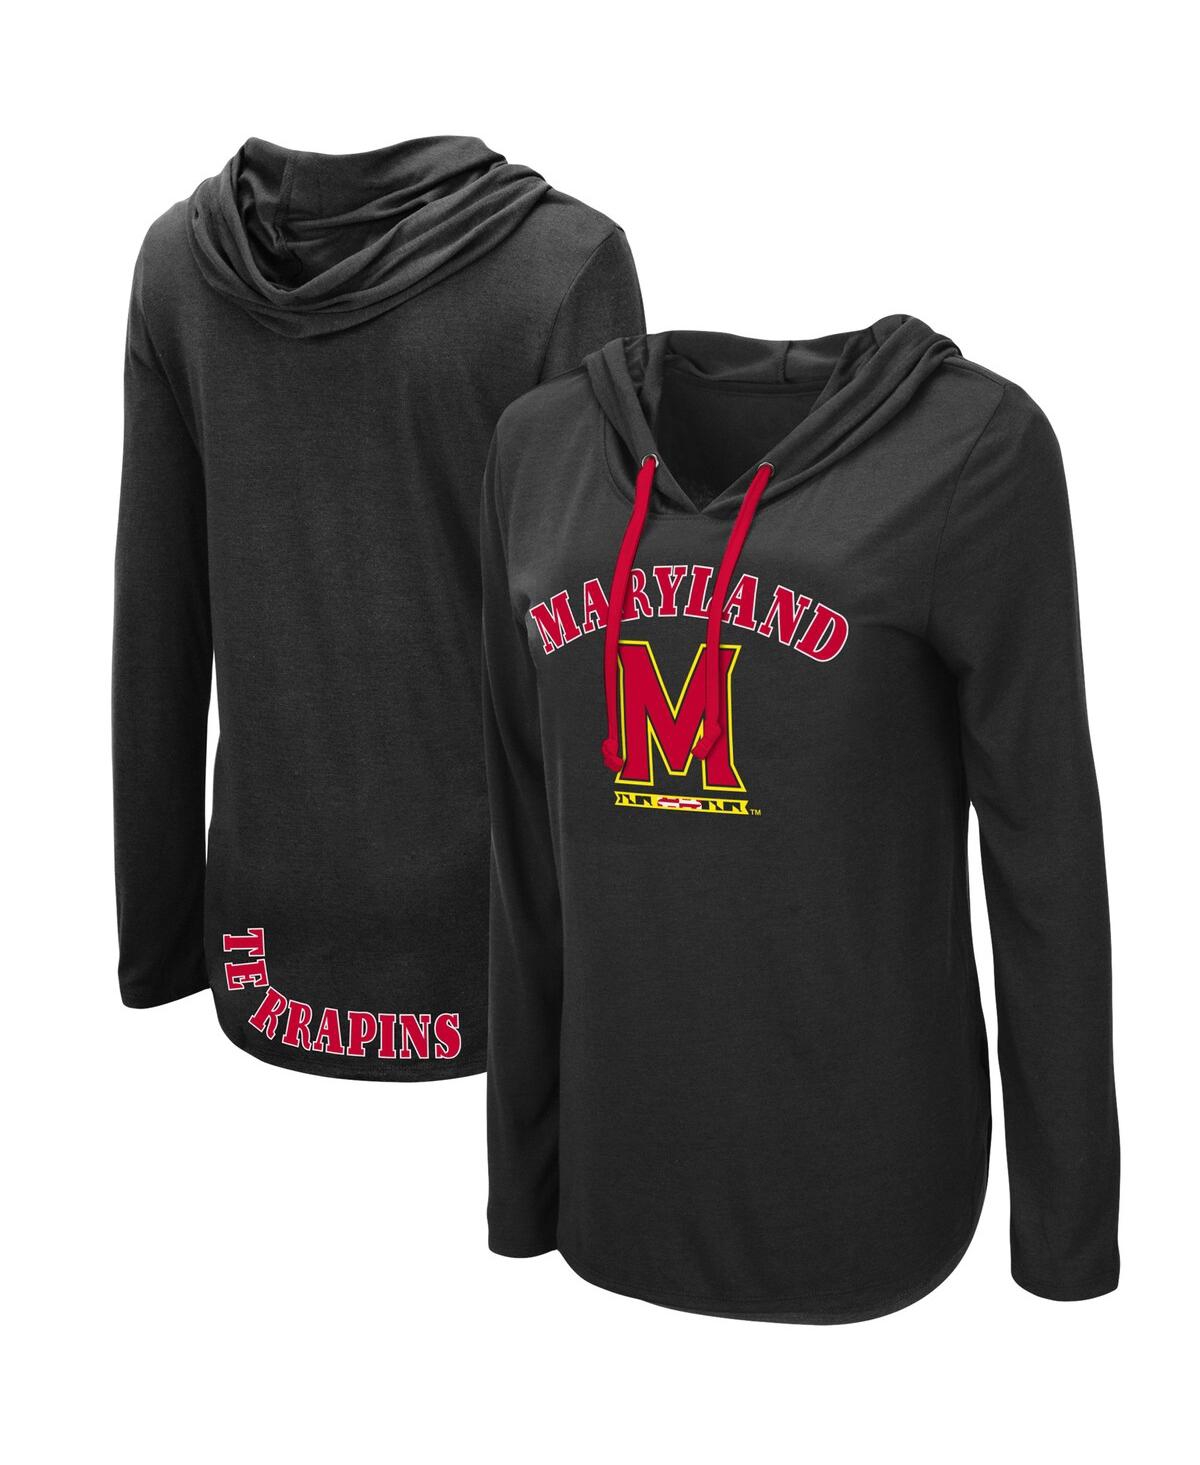 COLOSSEUM WOMEN'S COLOSSEUM BLACK MARYLAND TERRAPINS MY LOVER HOODIE LONG SLEEVE T-SHIRT